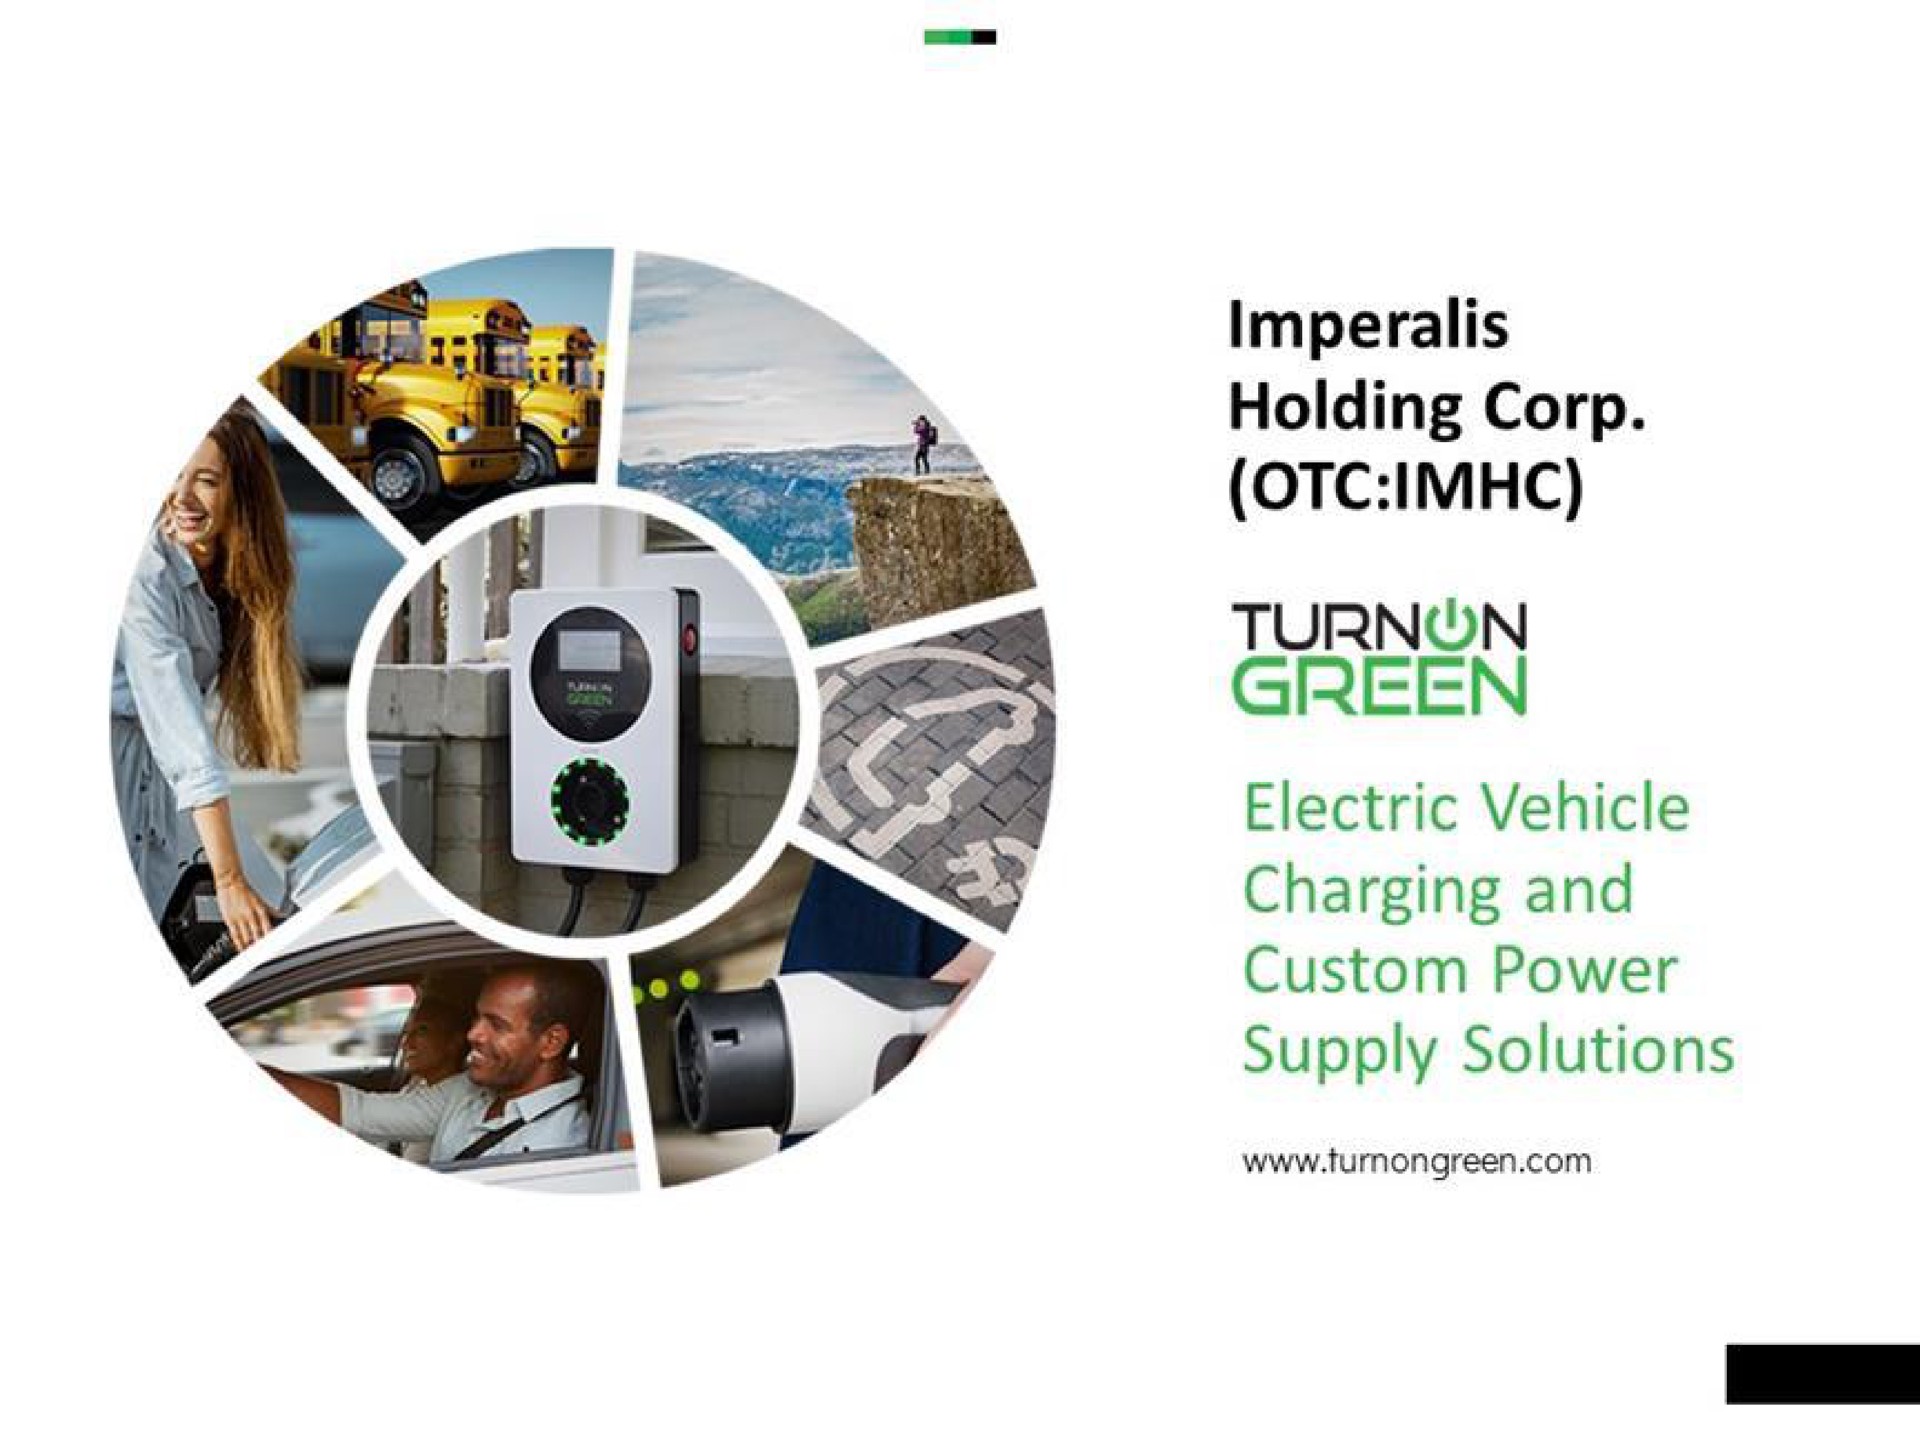 holding corp green electric vehicle charging and custom power supply solutions | TurnOnGreen